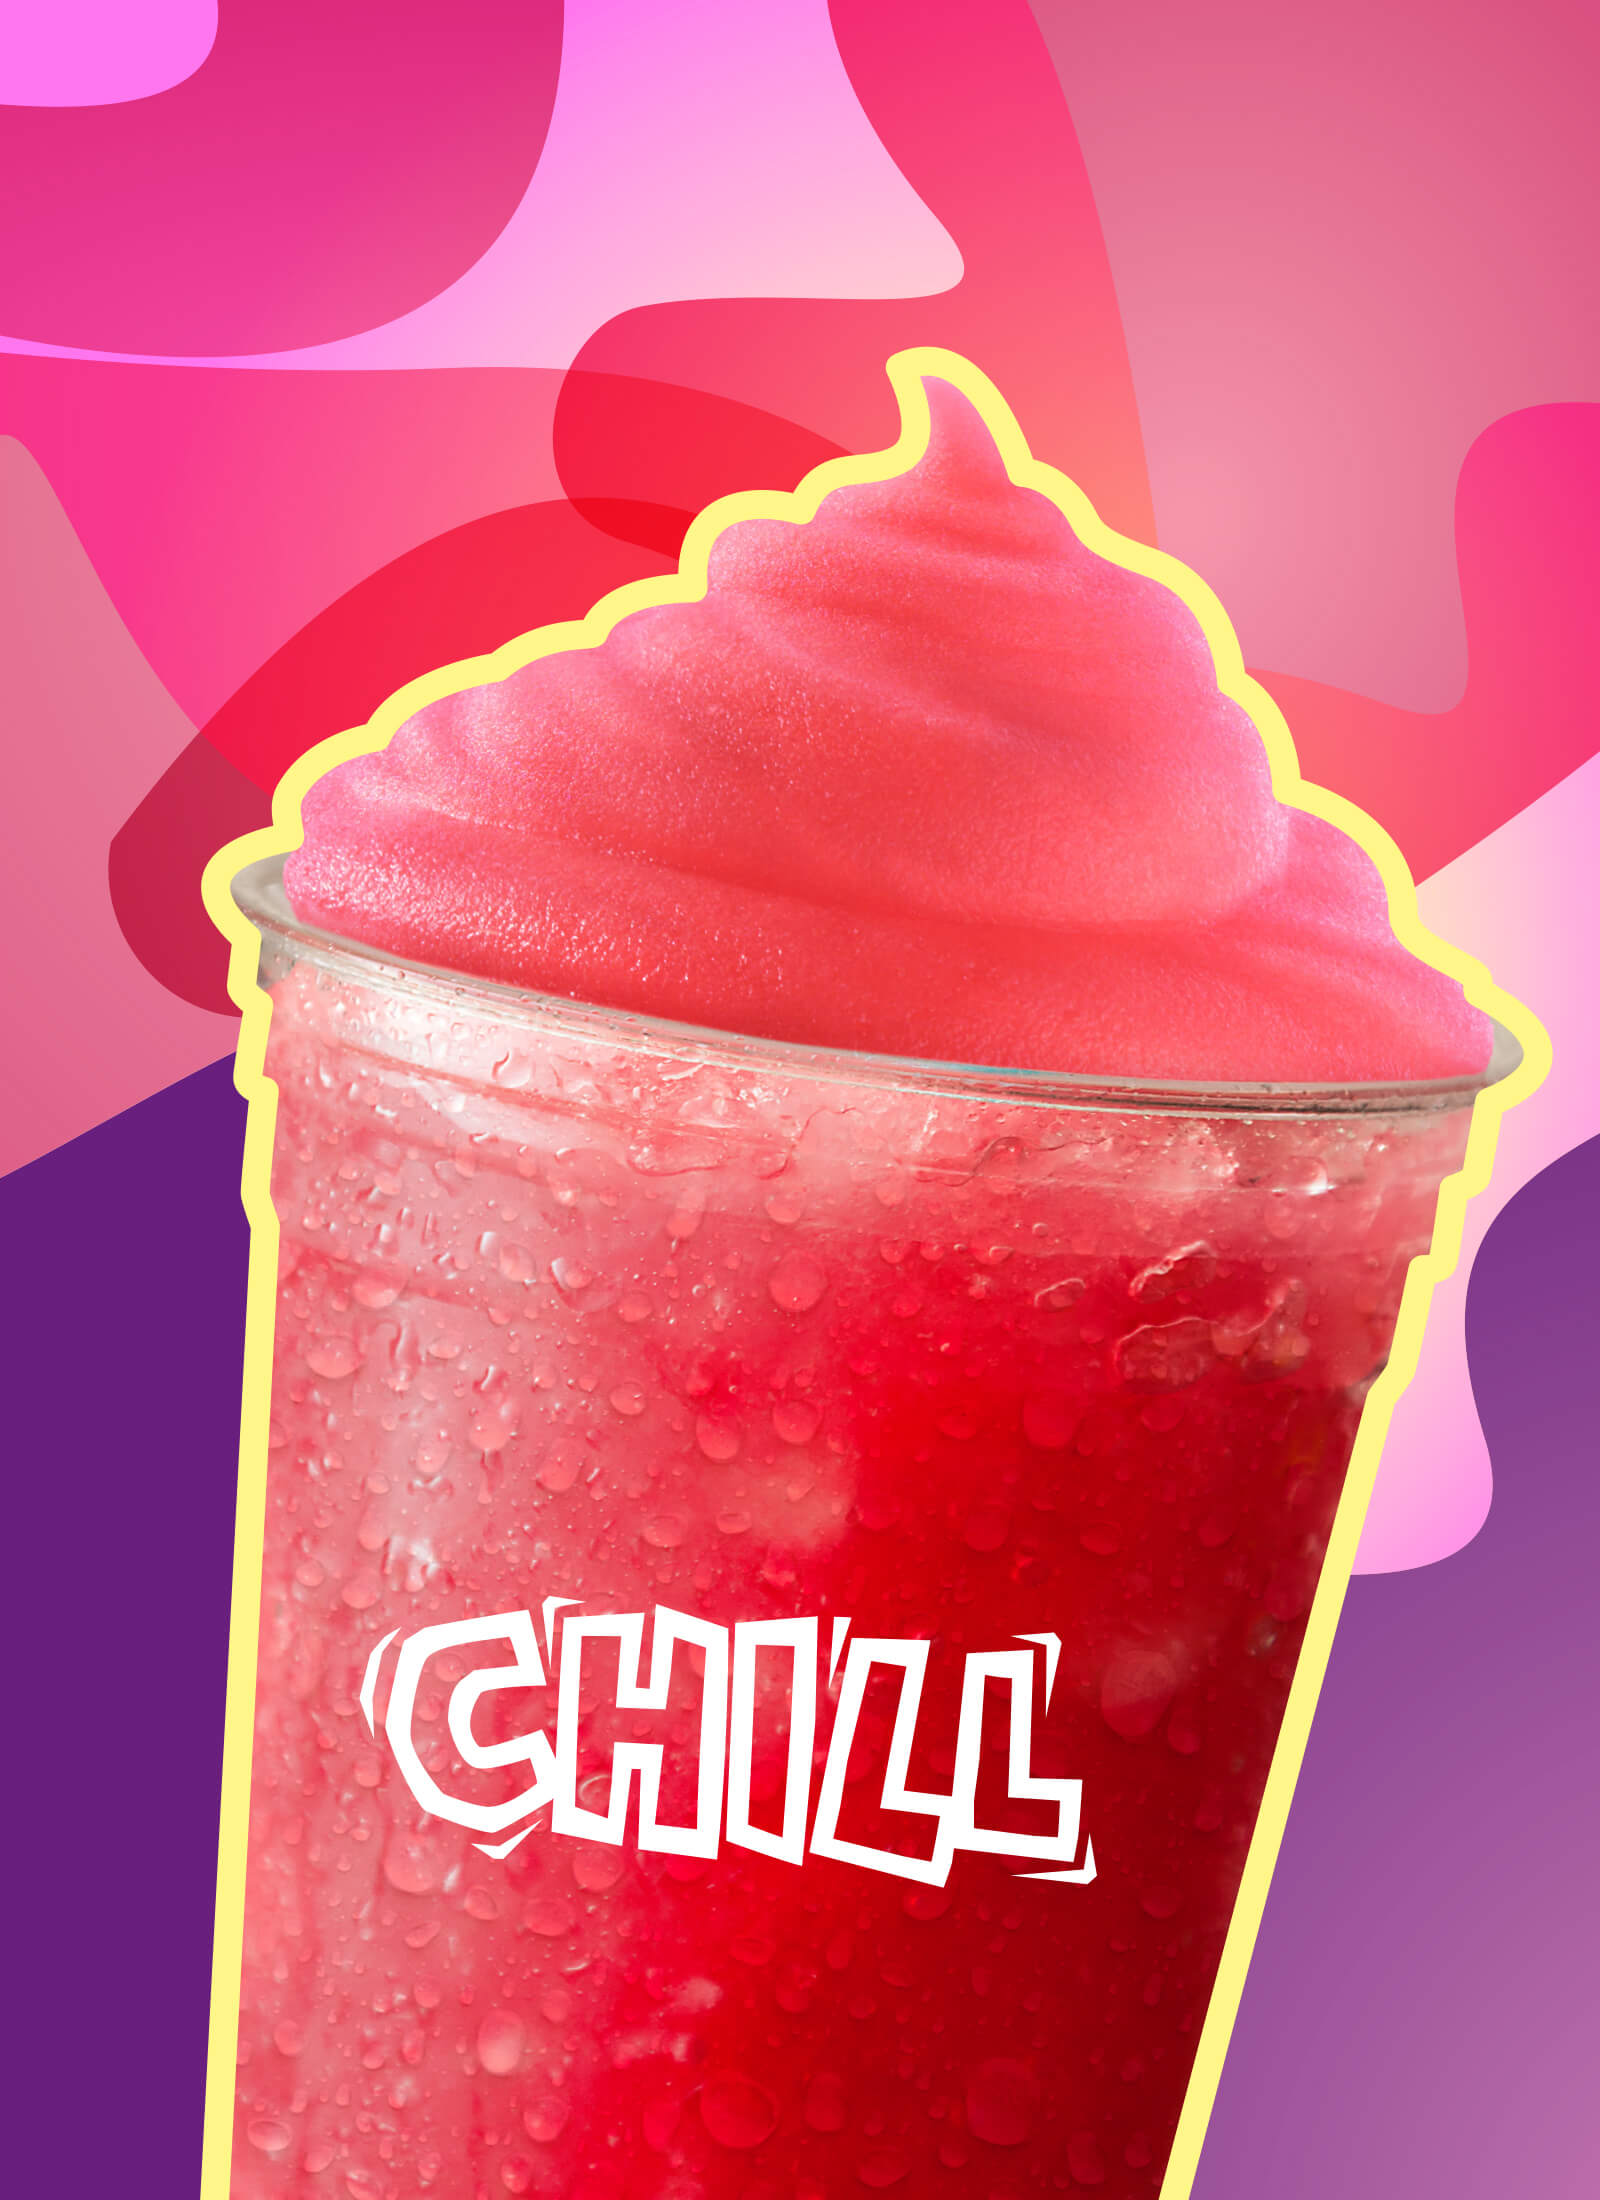 Chill - cool, fun and refreshingly colourful